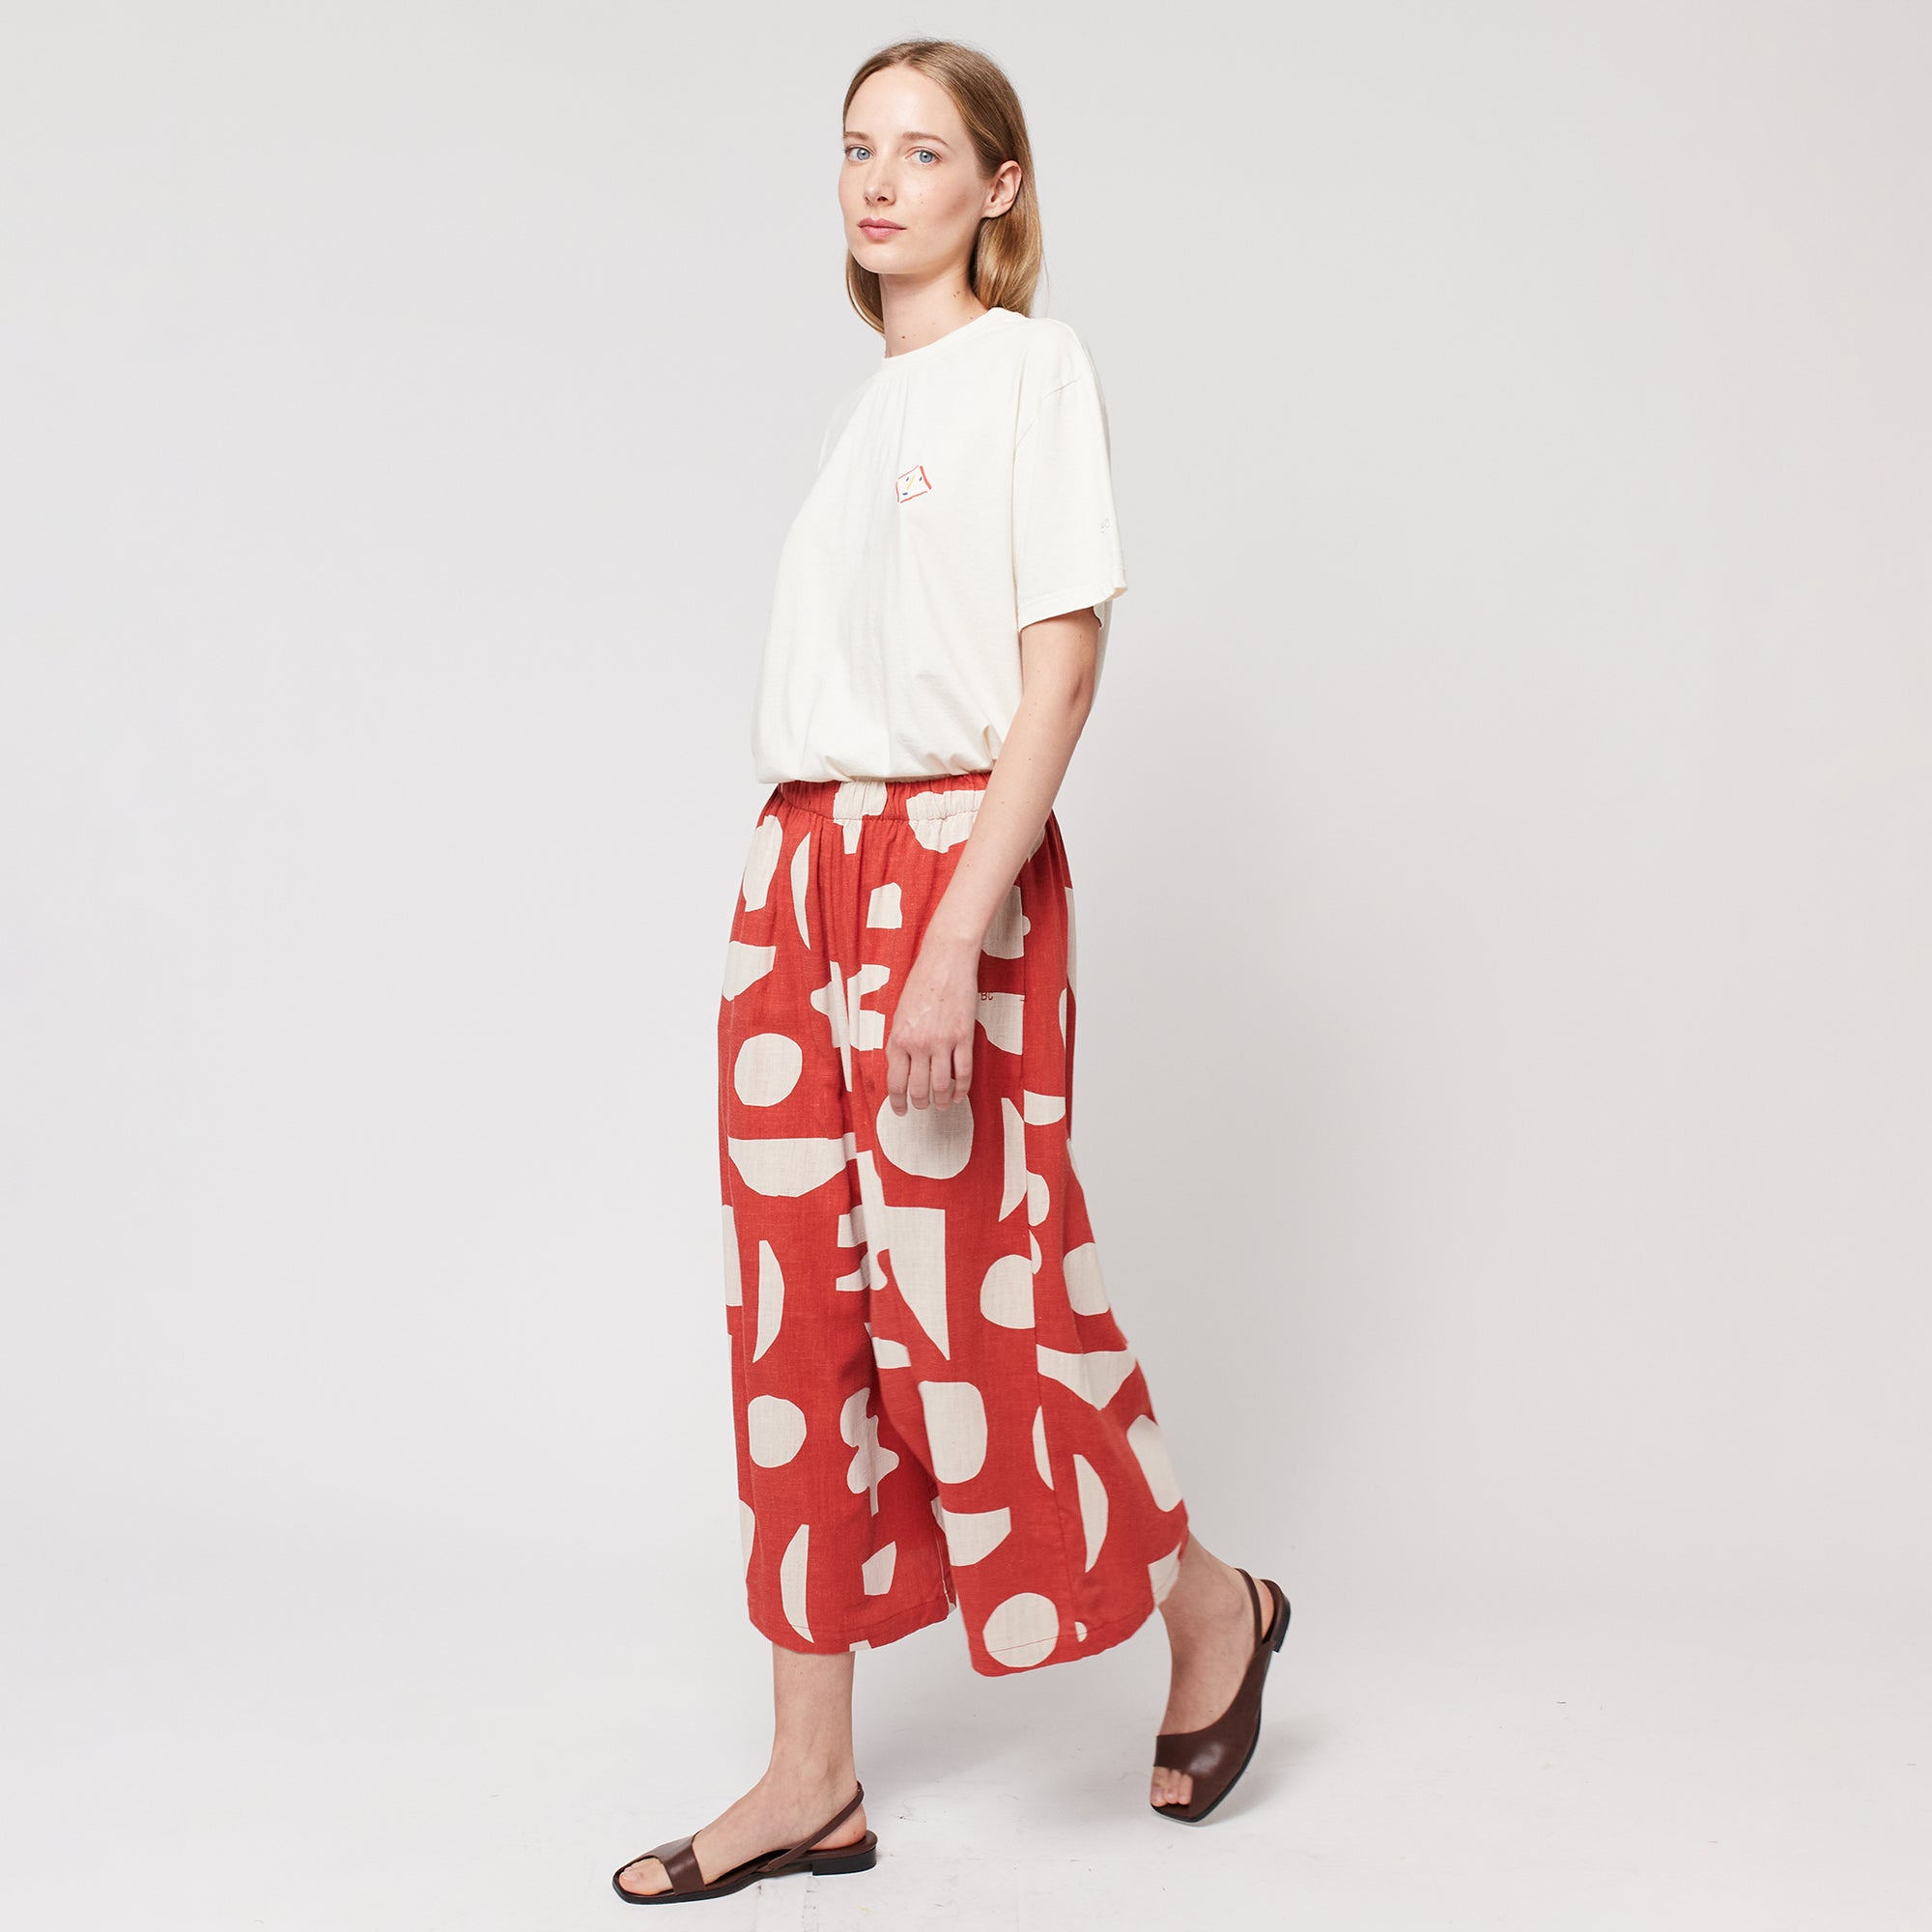 Bobo Choses Woman Summer Landscape All Over Pants Burgundy Red